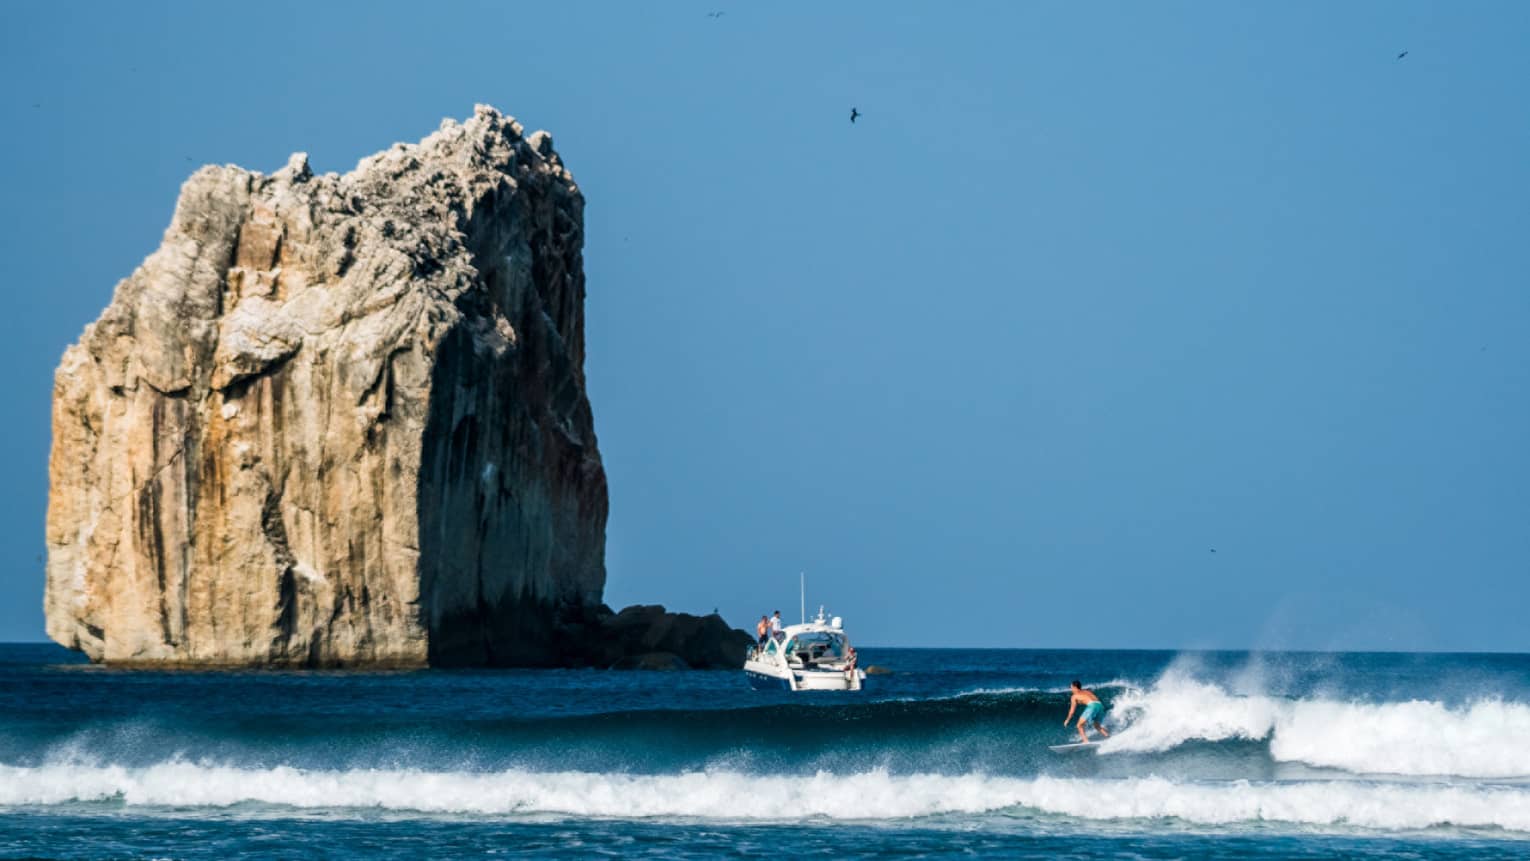 A surfer rides a wave in the foreground, with a boat nearby and a large rock formation towering above the water in the background